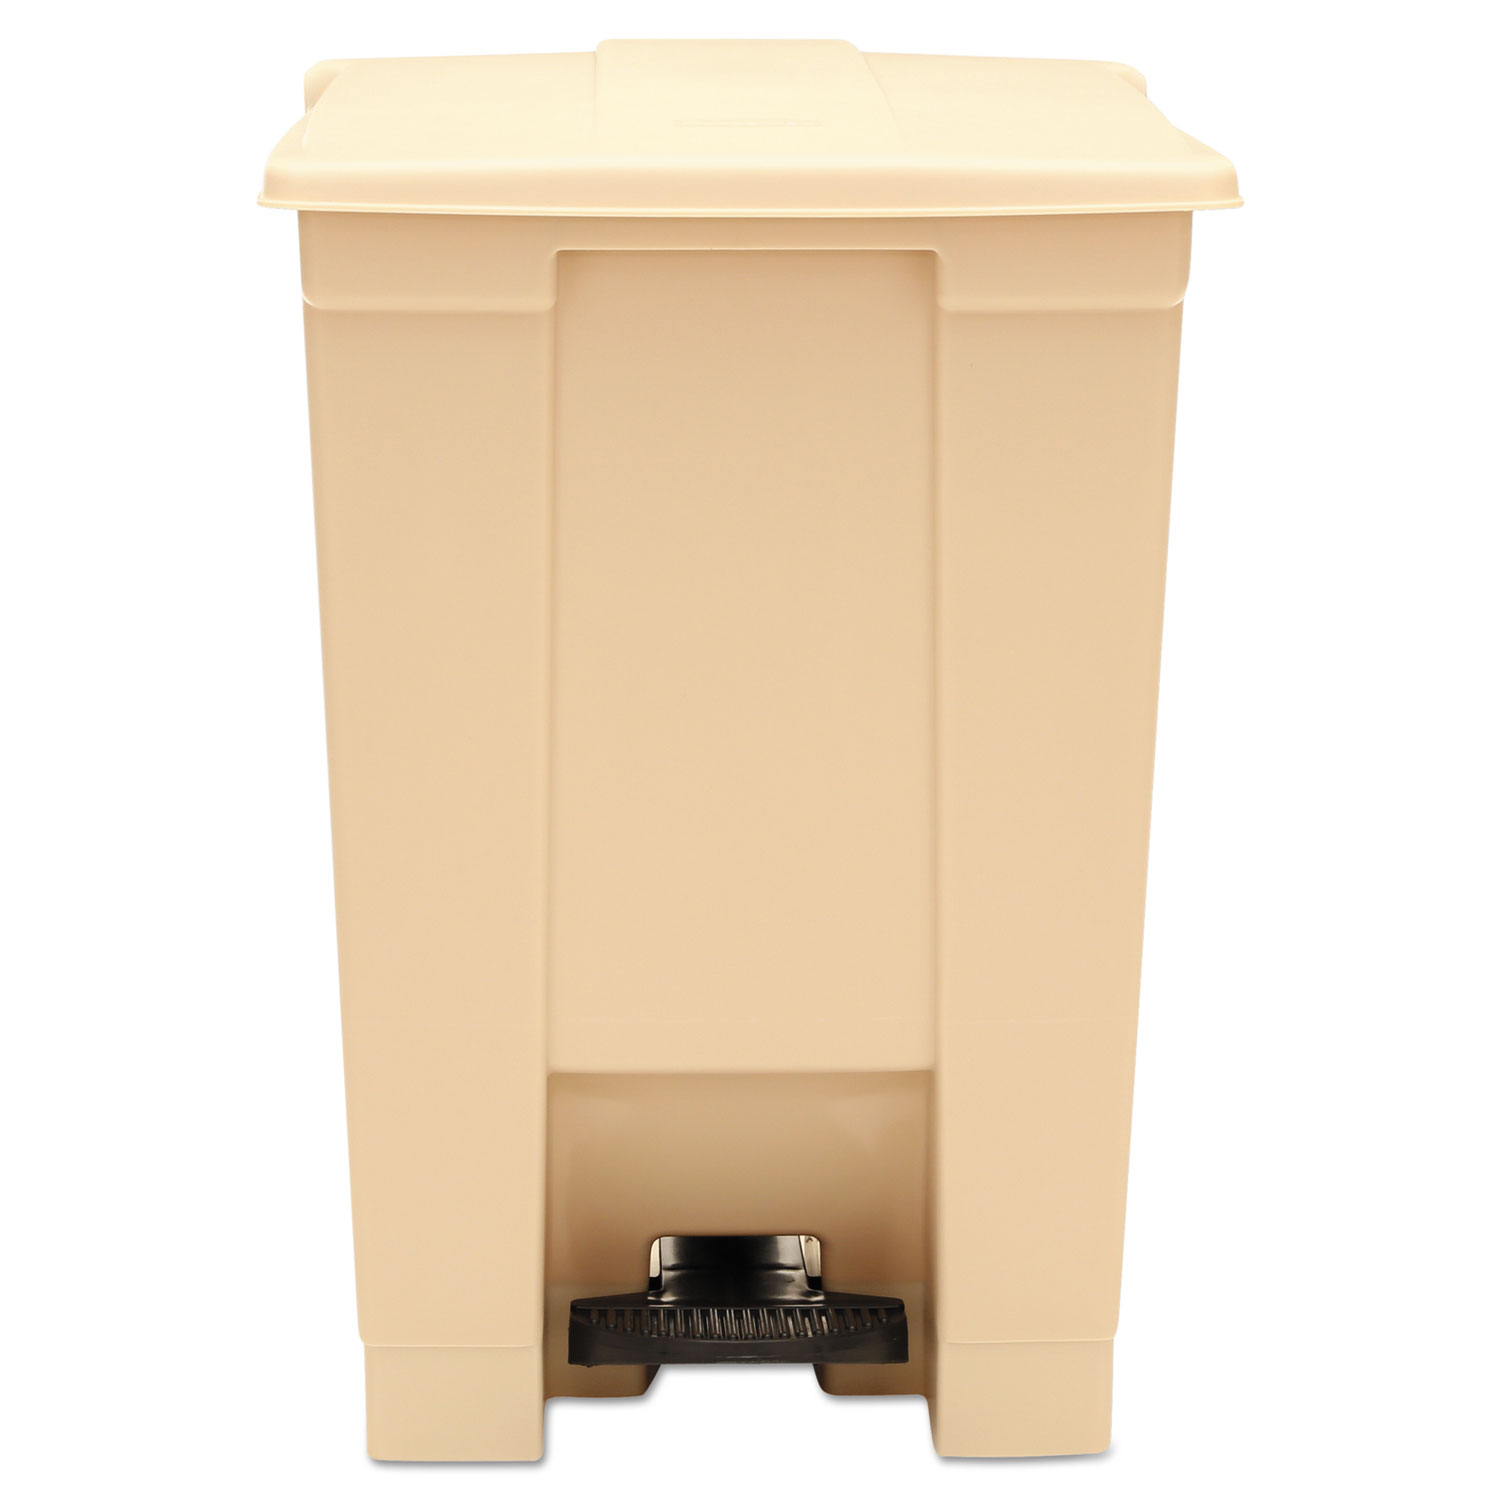 Rubbermaid Commercial Ranger Fire-Safe Container, Square, 45 gal, Beige